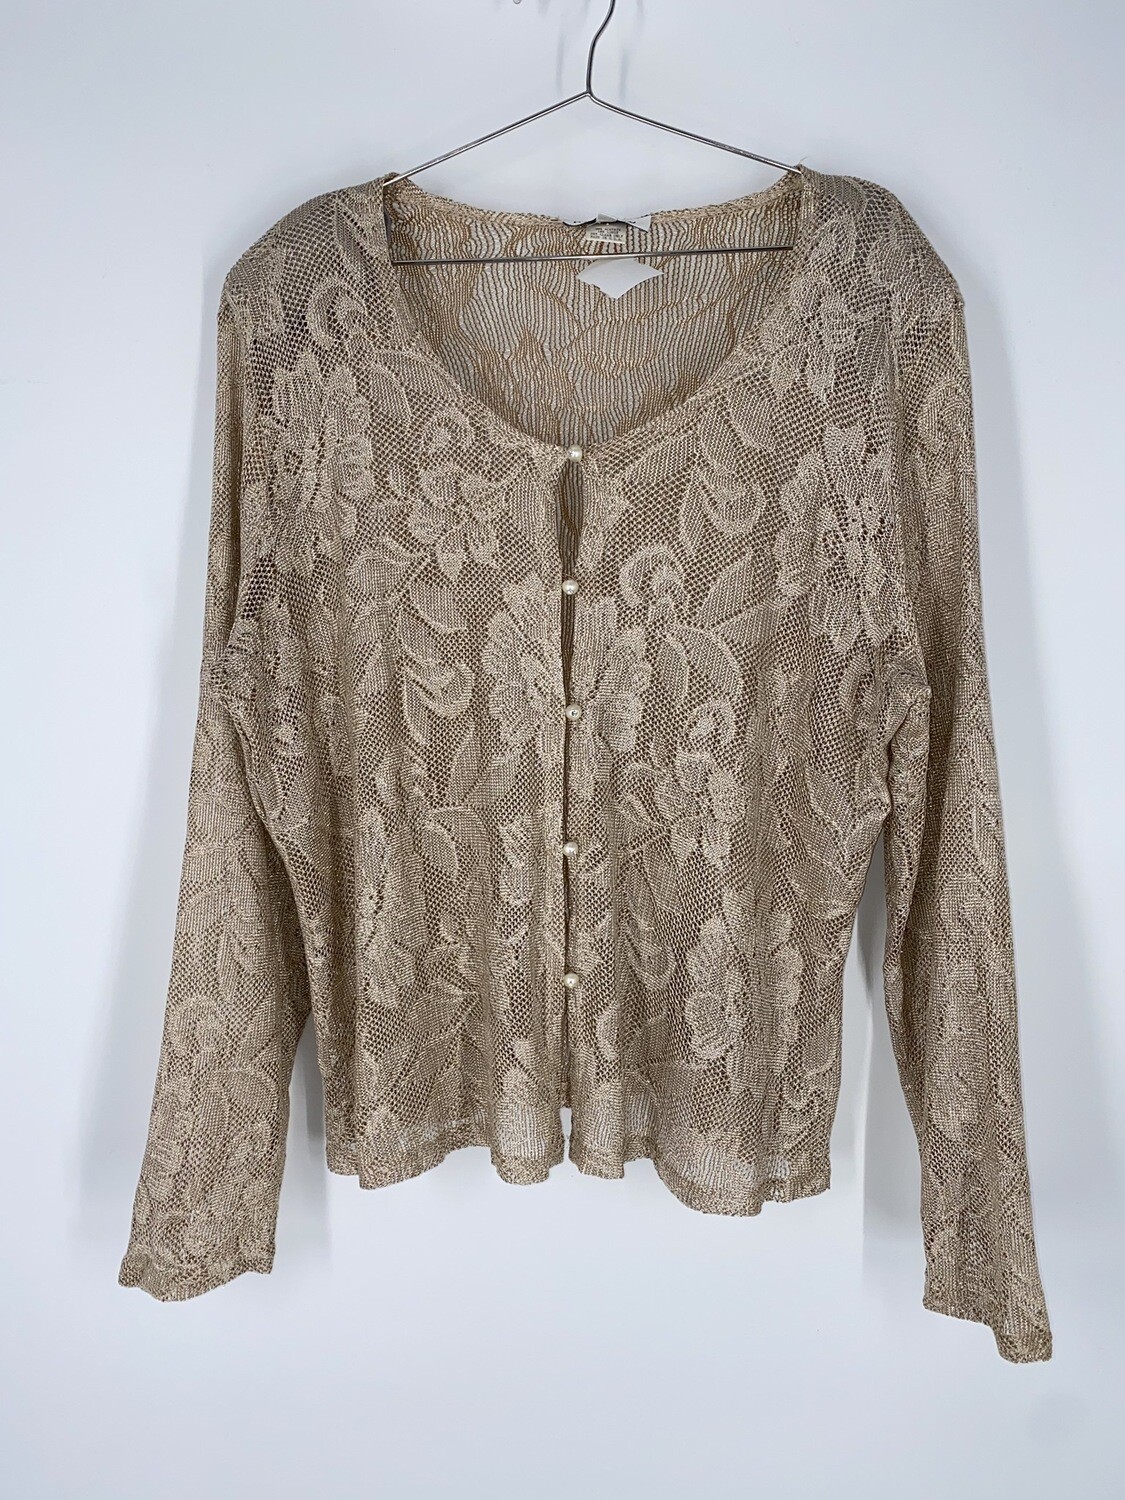 Harlow Nites Gold And Cream Knit Button Up Top Size L